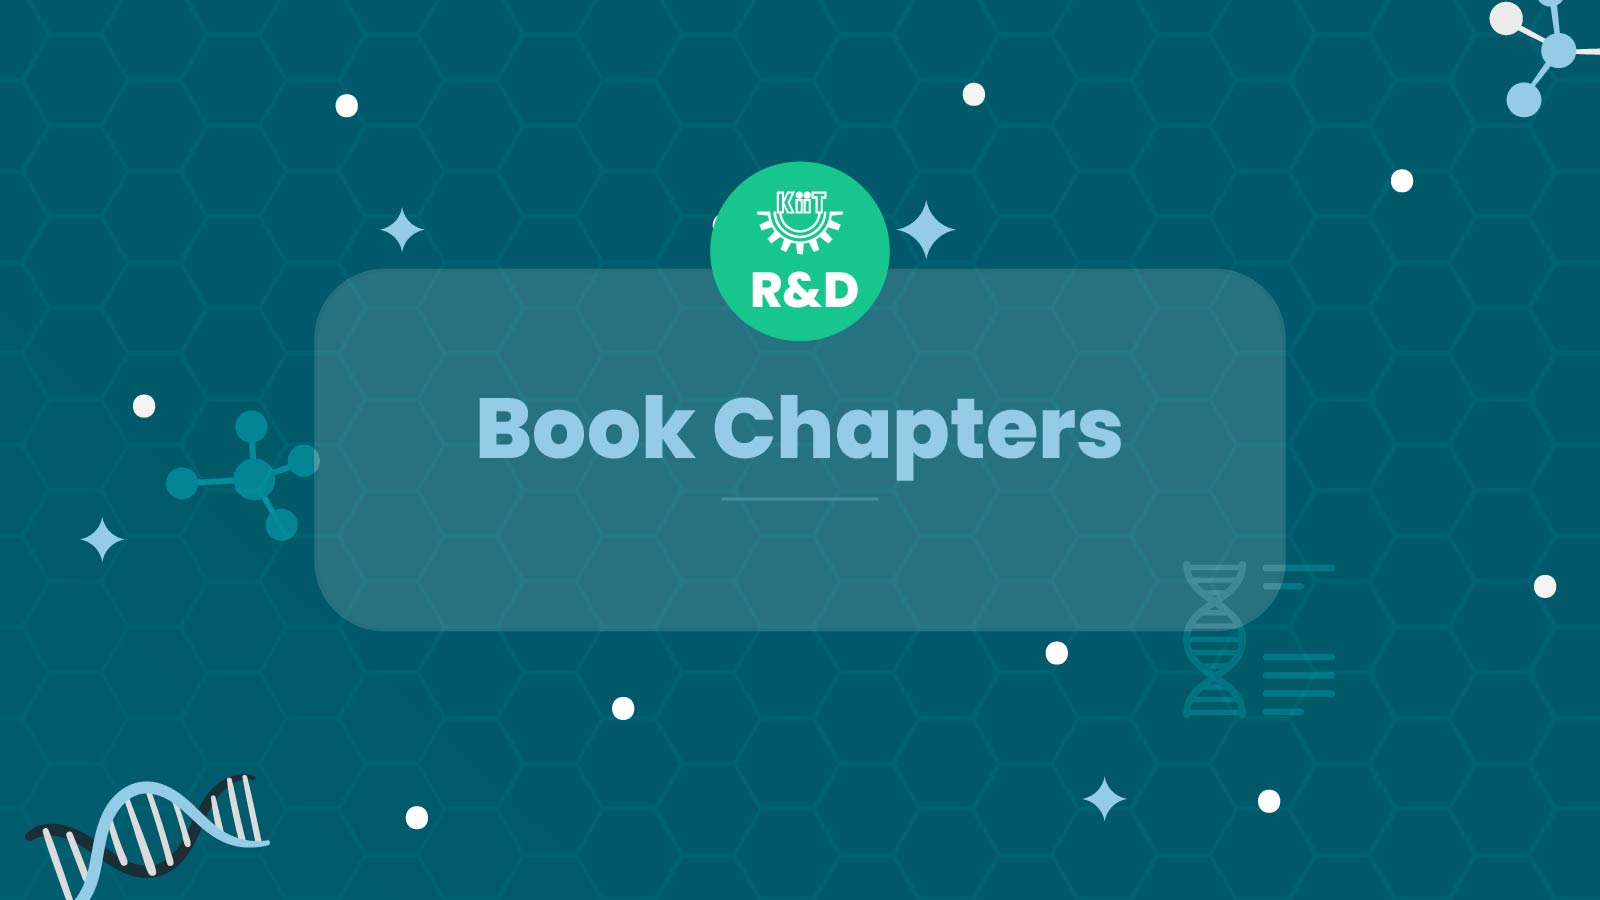 KIIT R&D Research and Development-Book Chapters